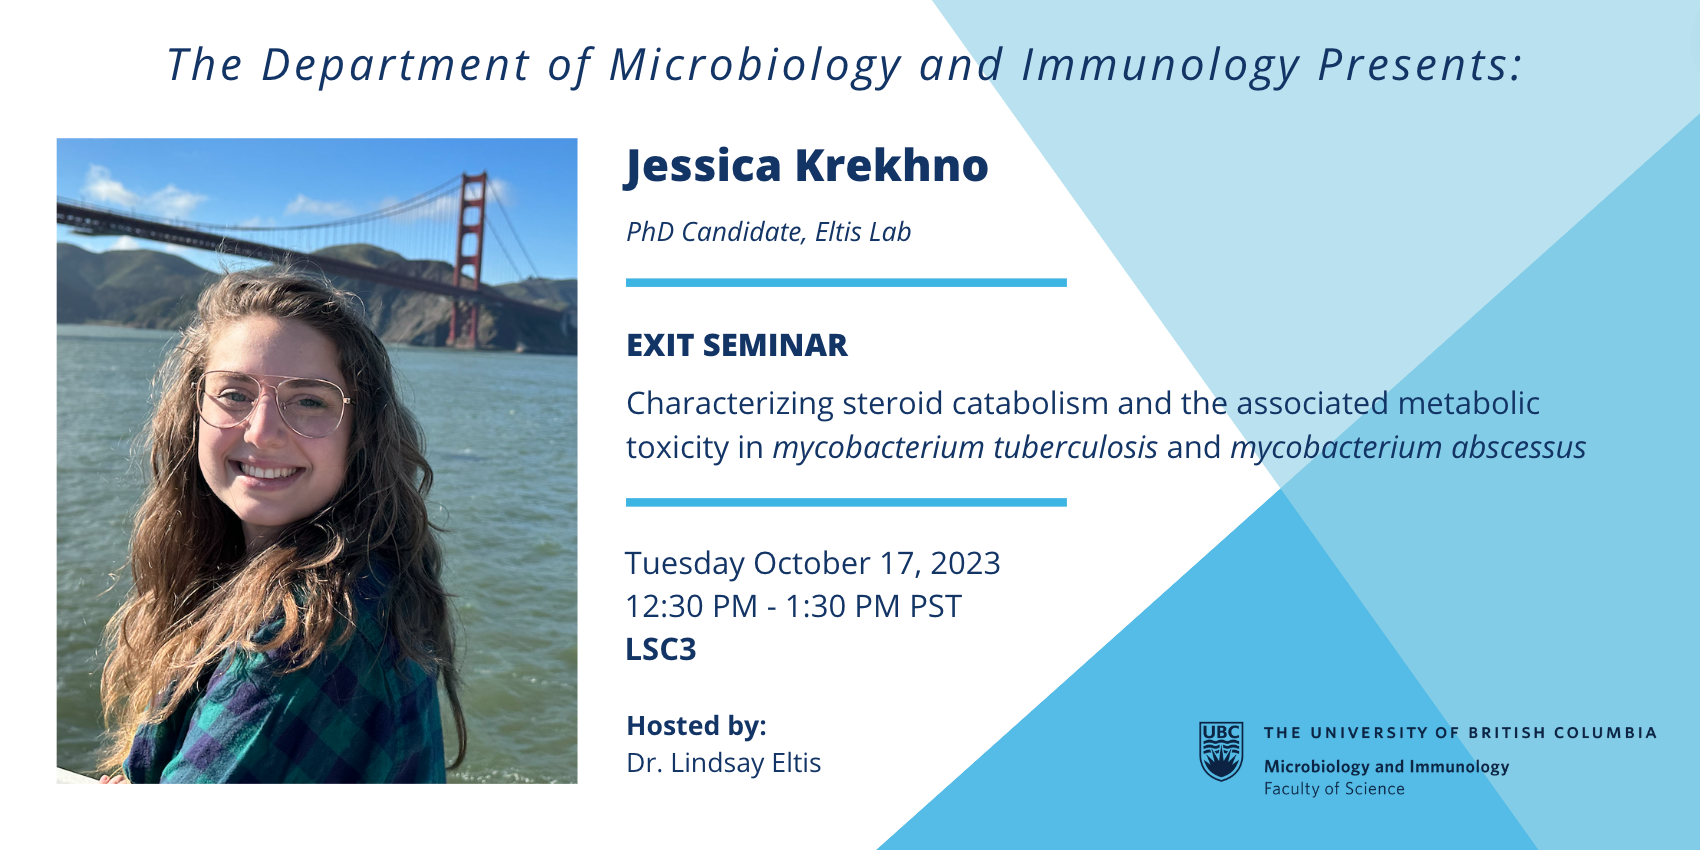 Poster promotion for Jessica's seminar 